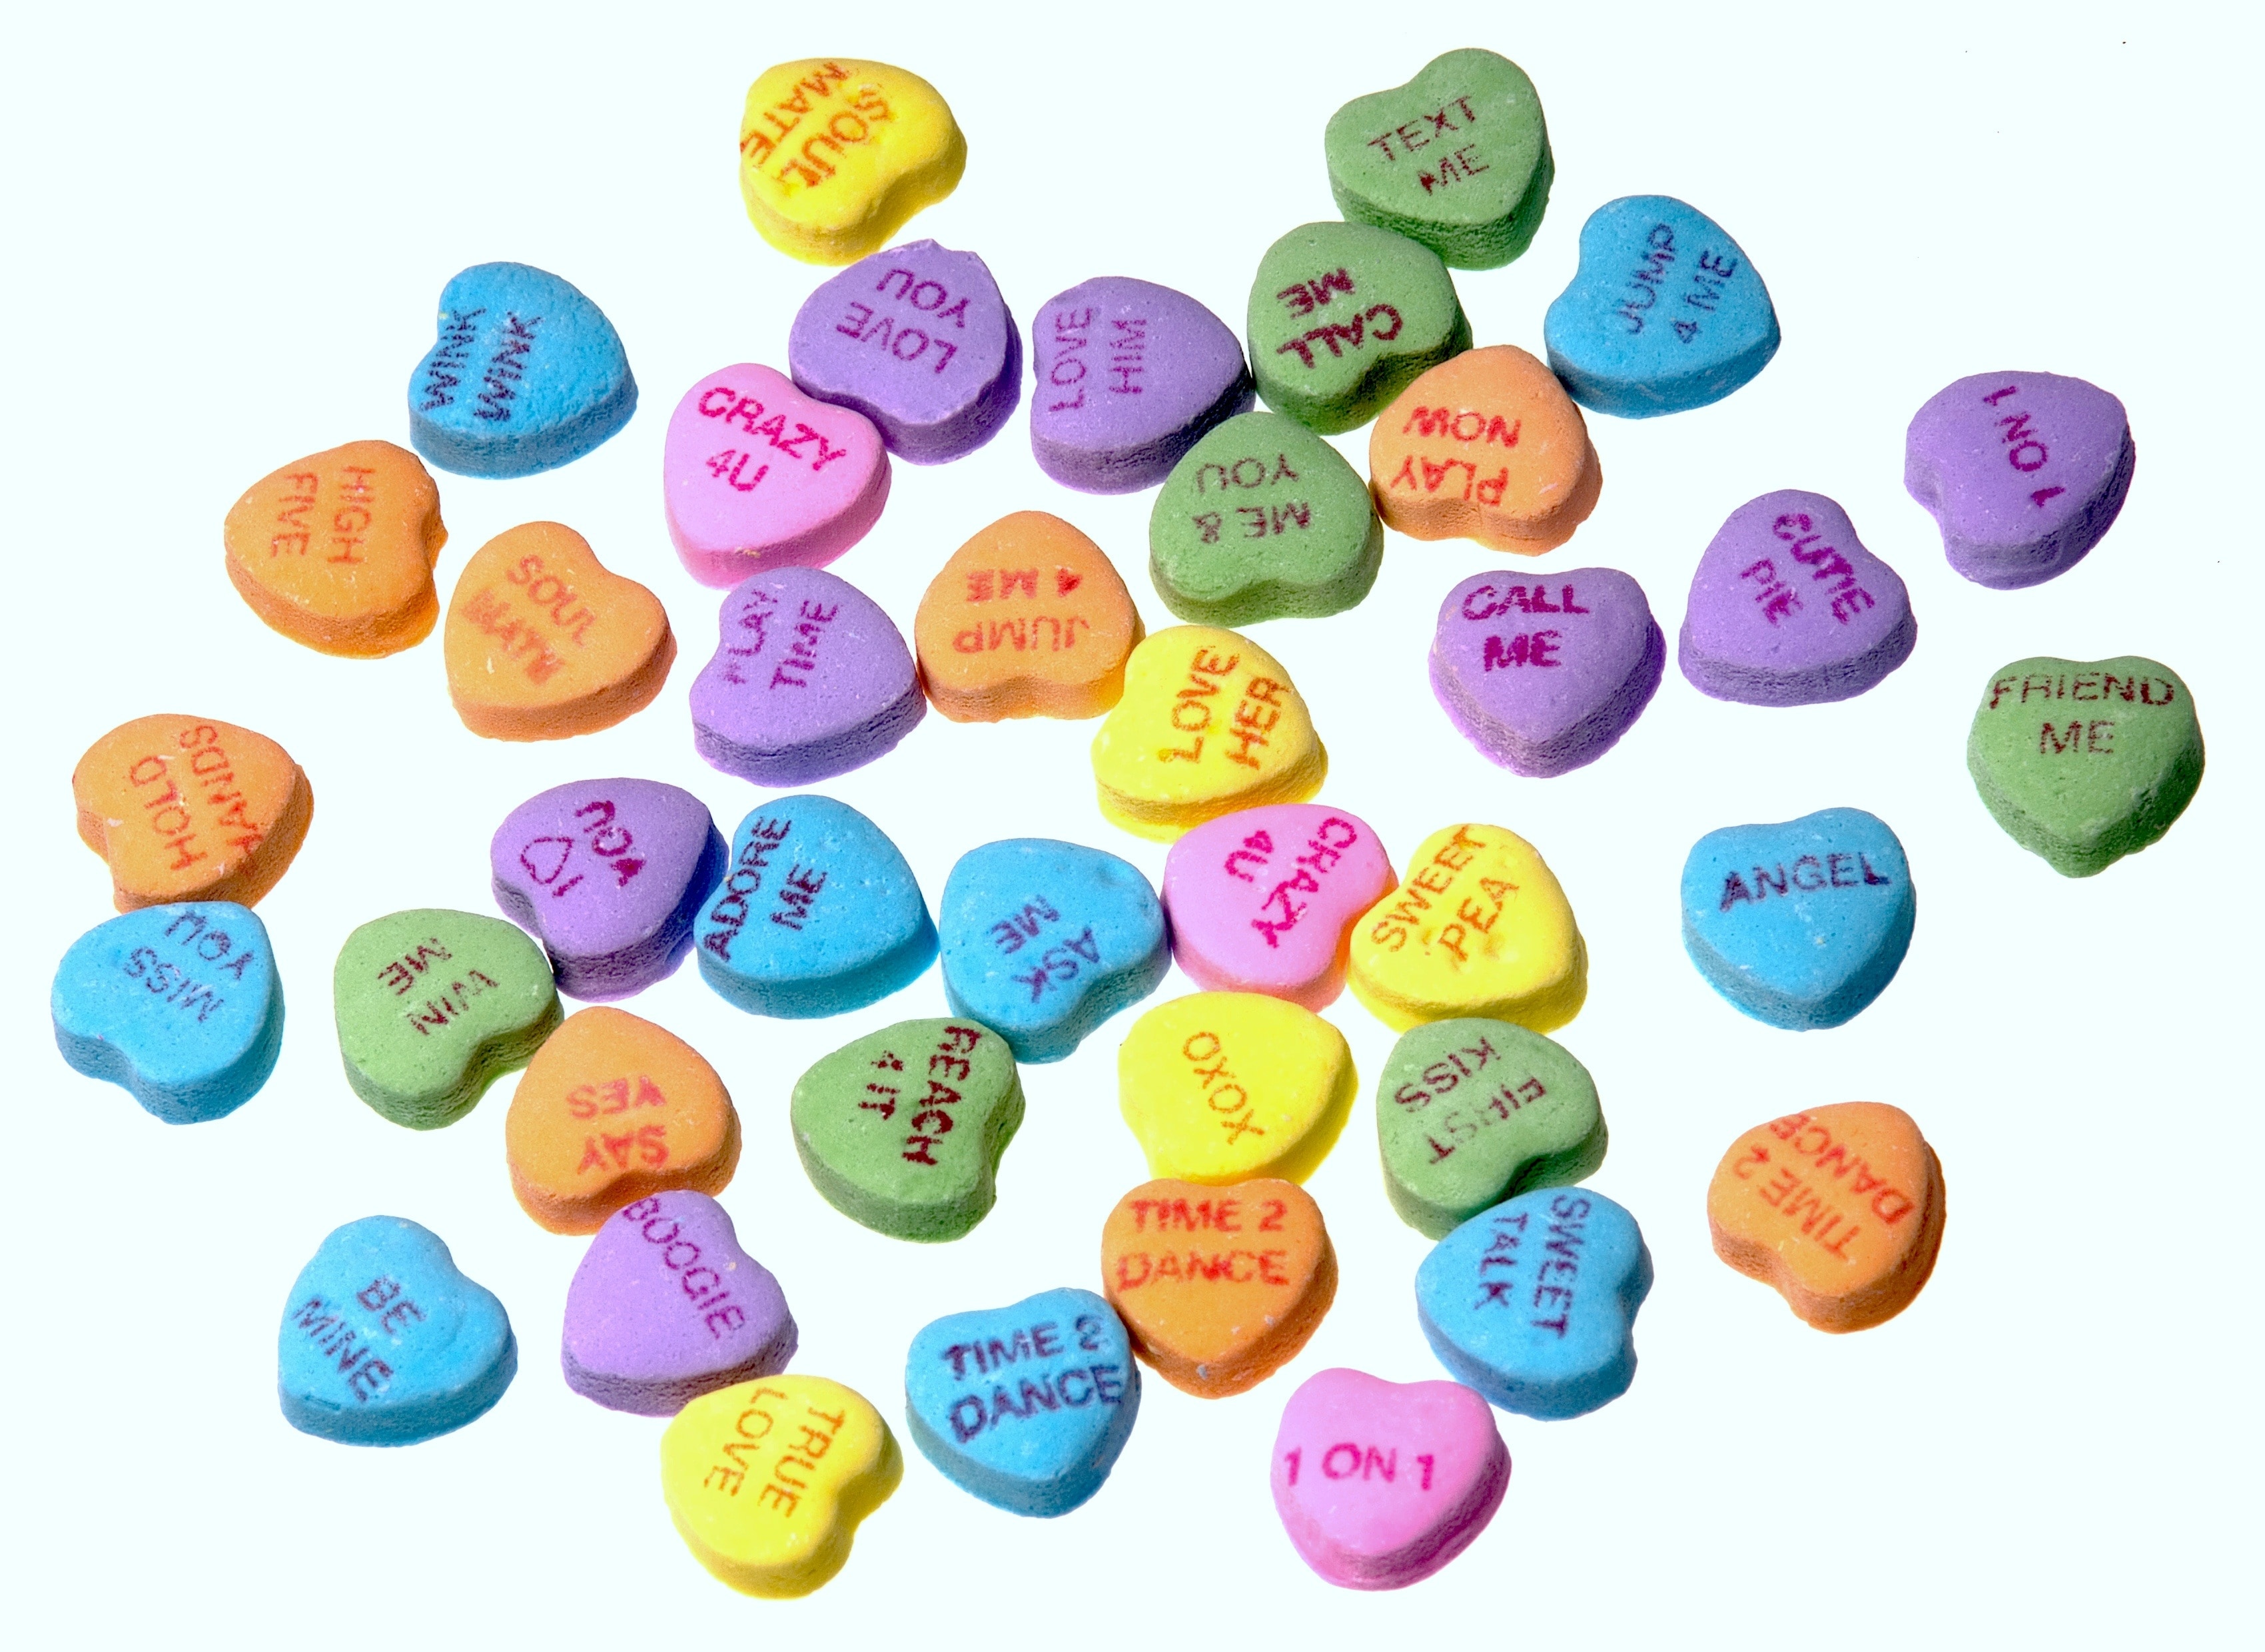 heart-shaped ornaments with text prints